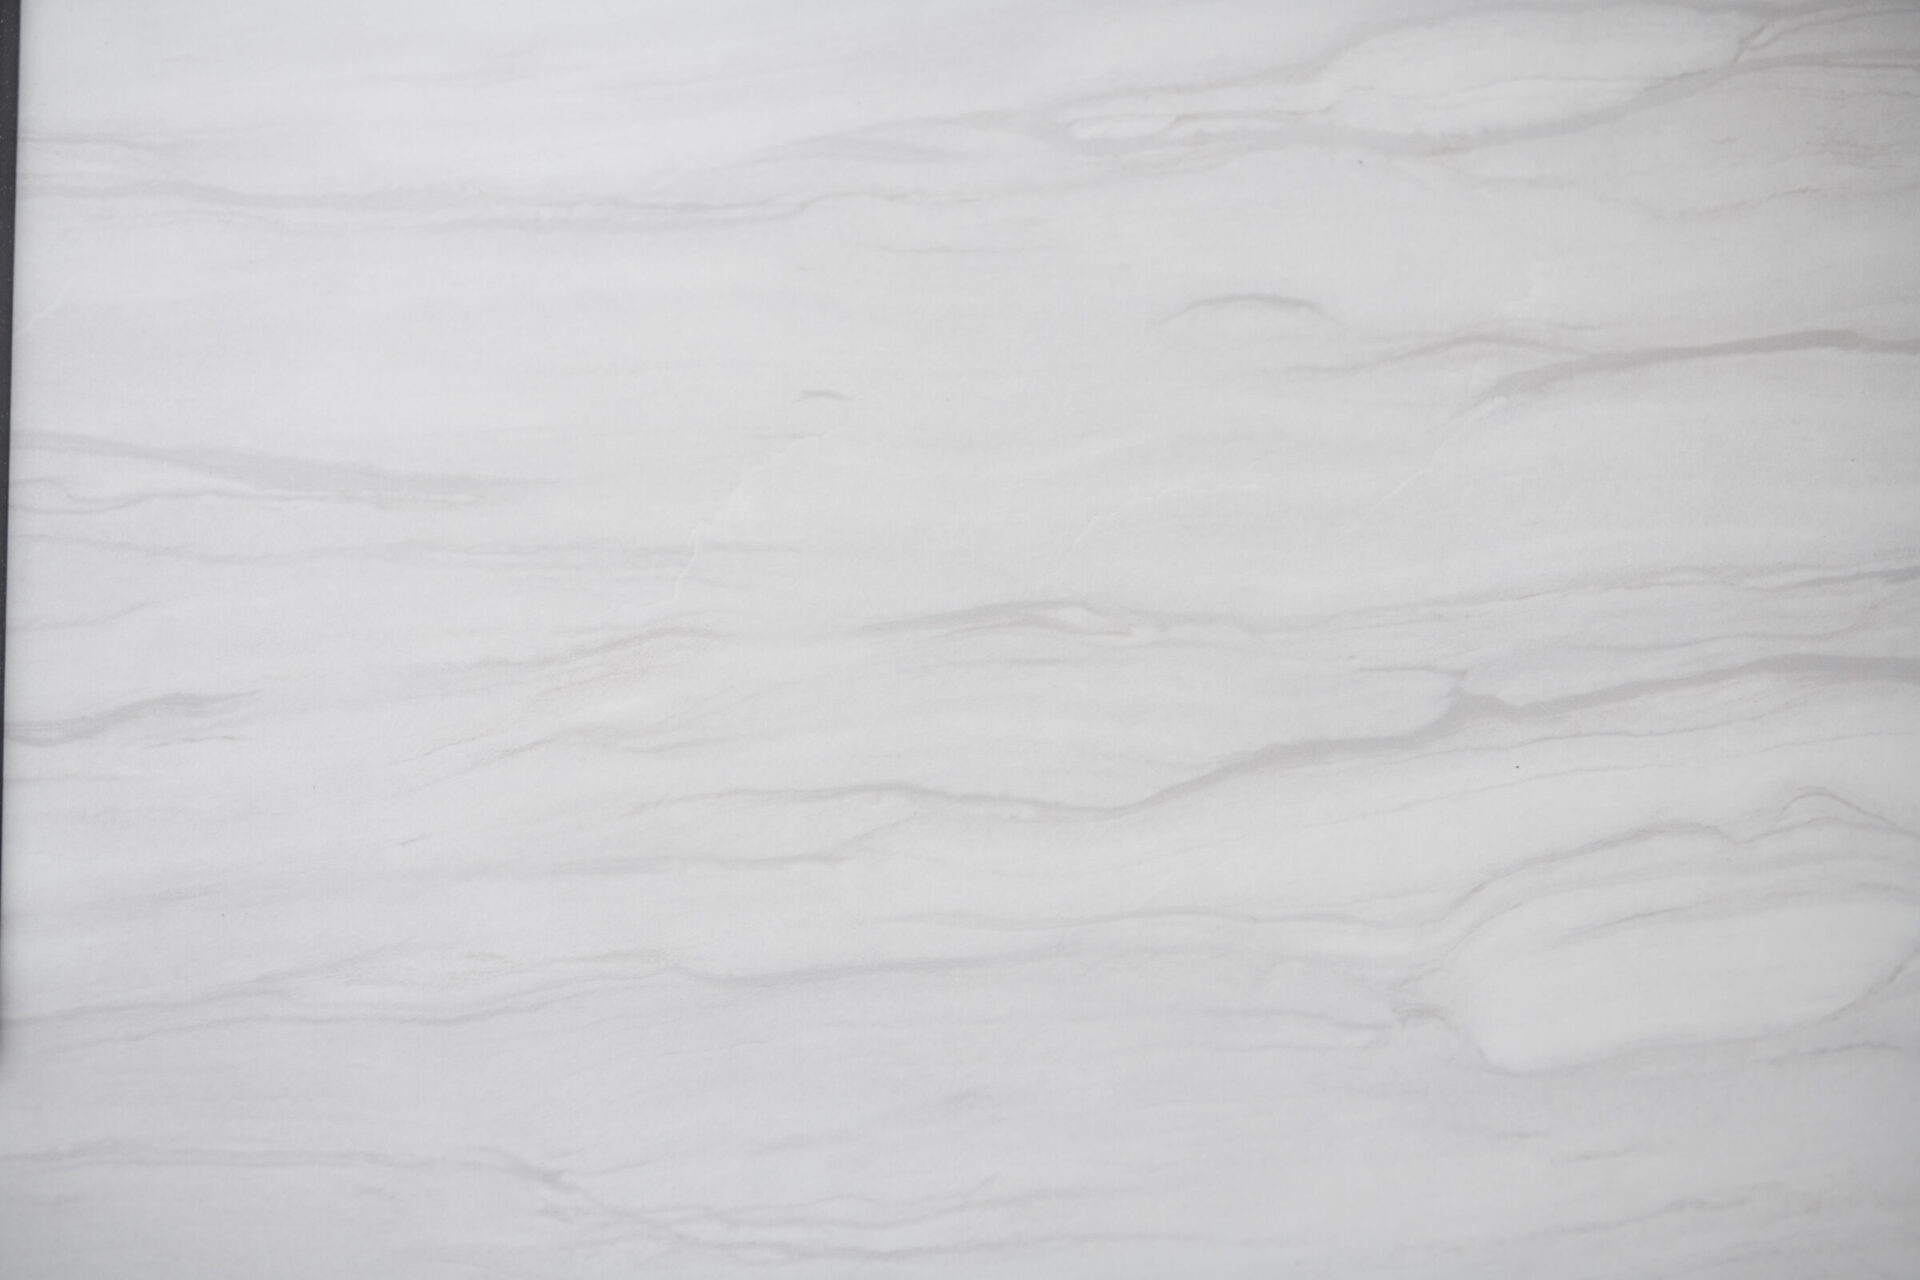 This image displays a smooth white marble surface with subtle gray veins, exhibiting a natural pattern commonly used for luxurious countertops and flooring.